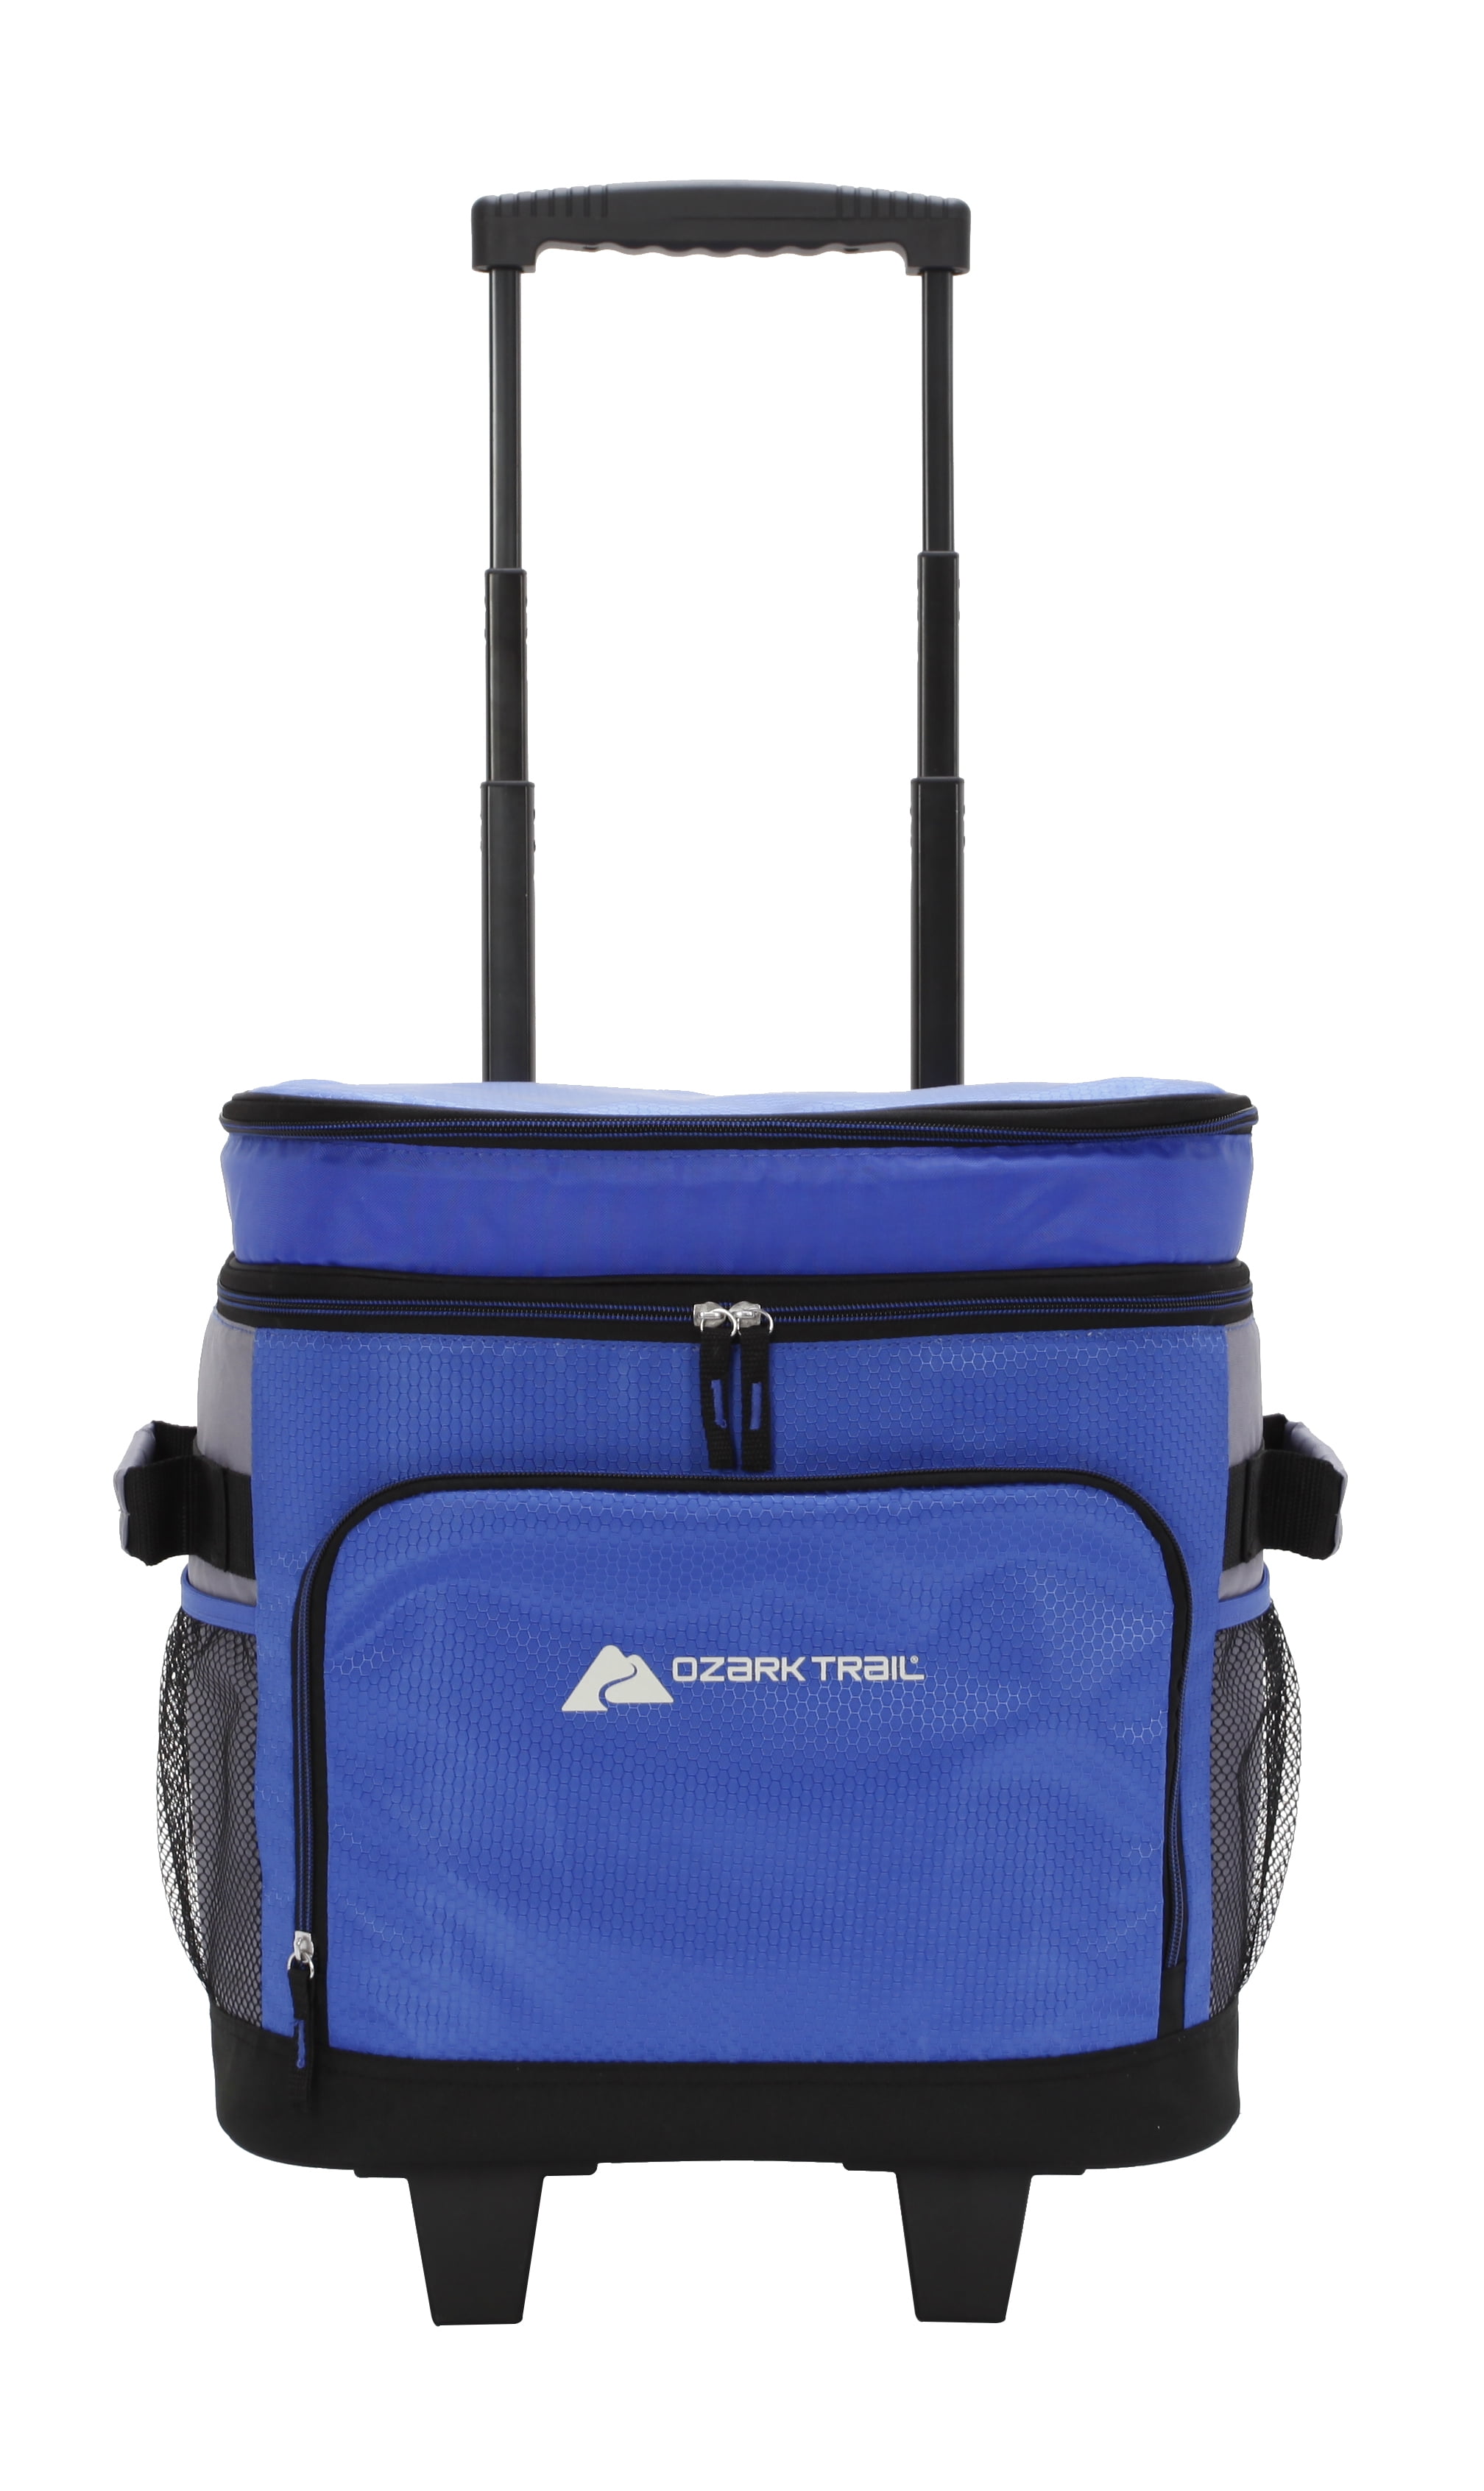 Coleman 42-Can Soft Cooler with Wheels, Space Blue - Walmart.com